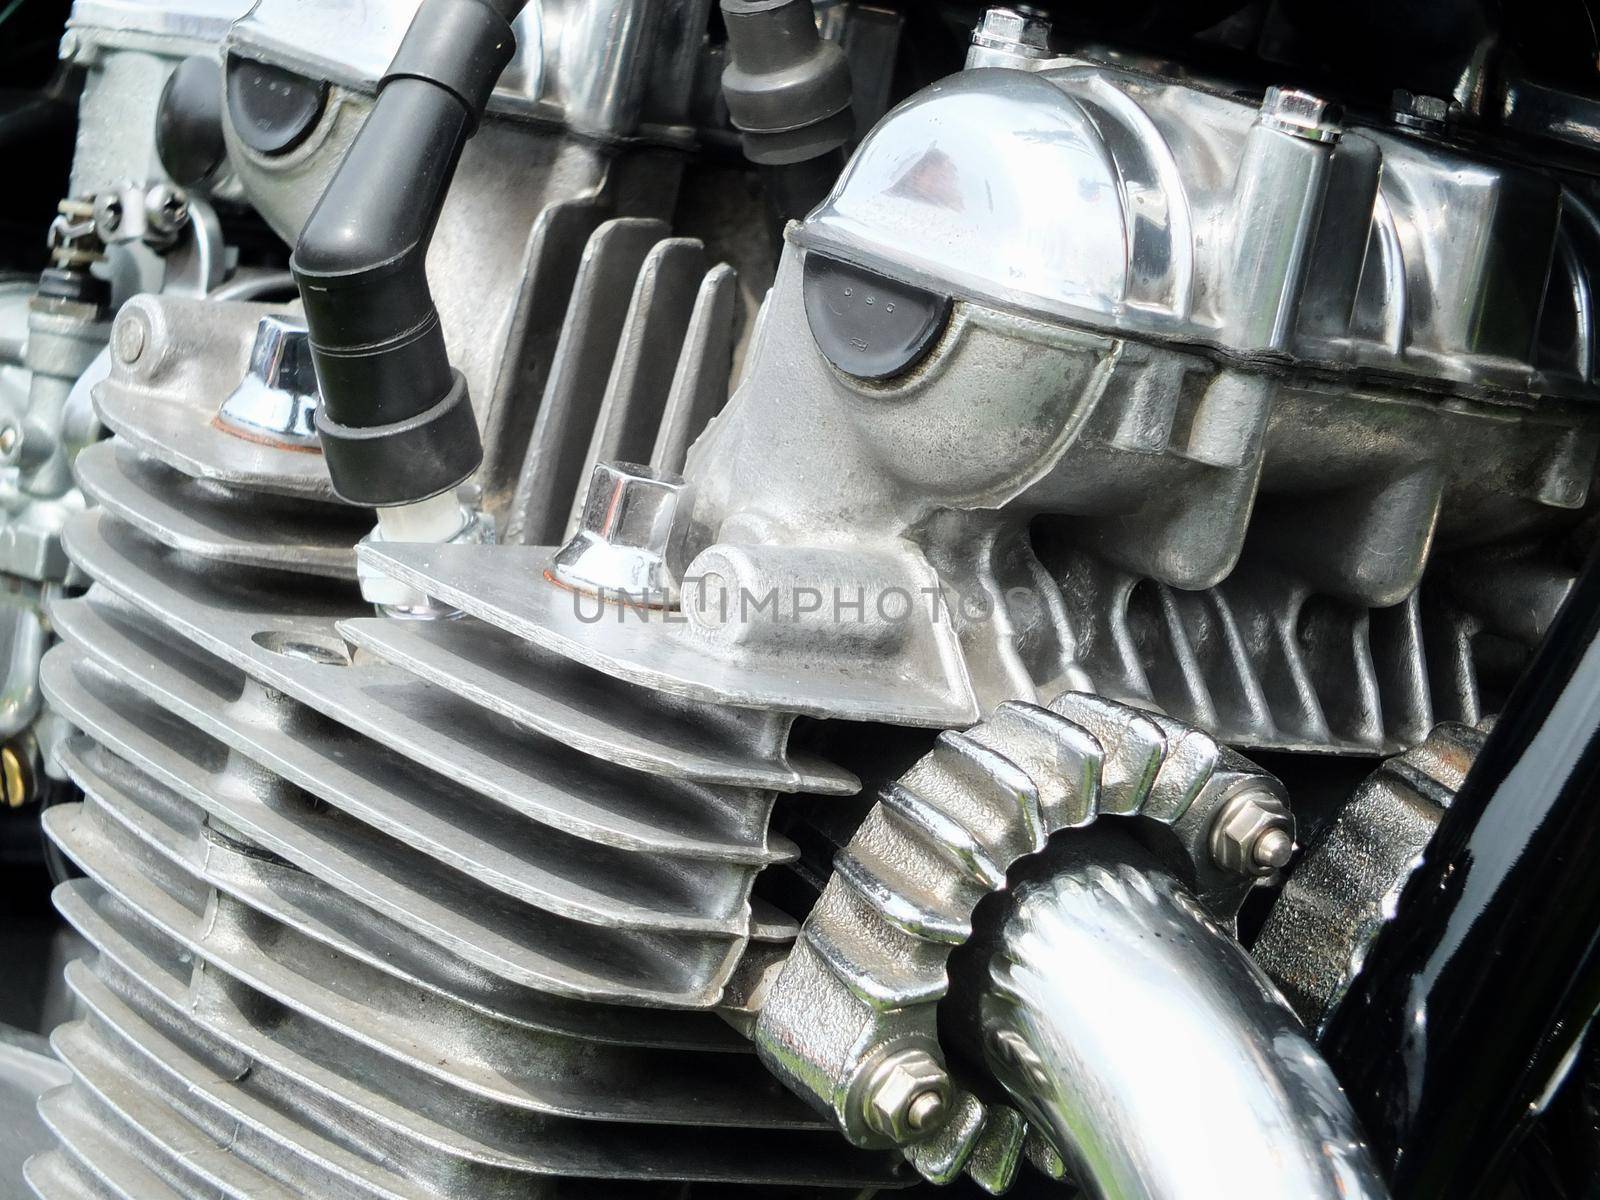 close up detail of the engine of an old vintage motorcycle with black frame and shiny chrome exhaust pipes